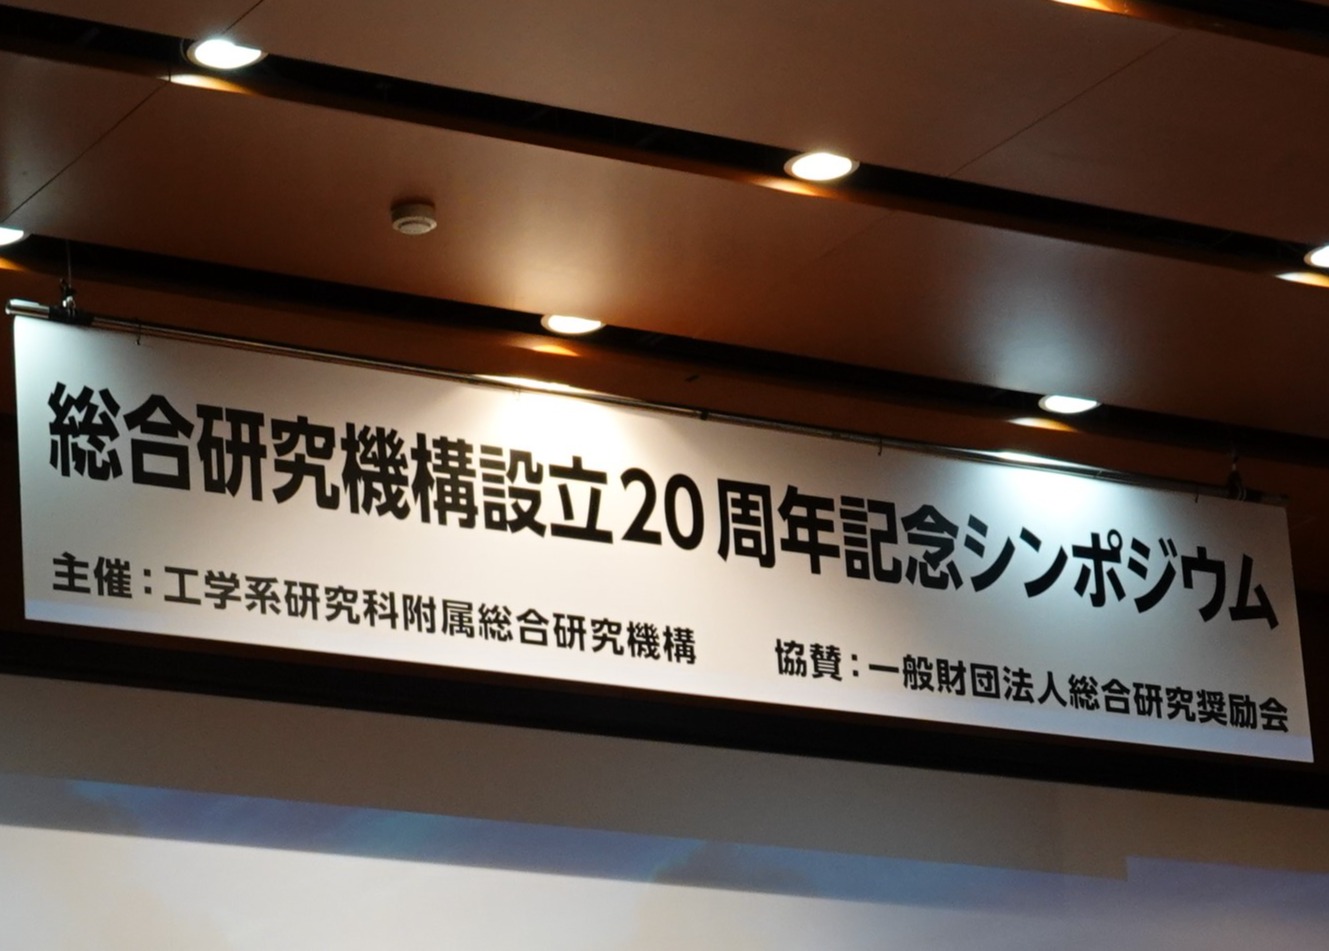 The IEI 20th Anniversary Symposium was held